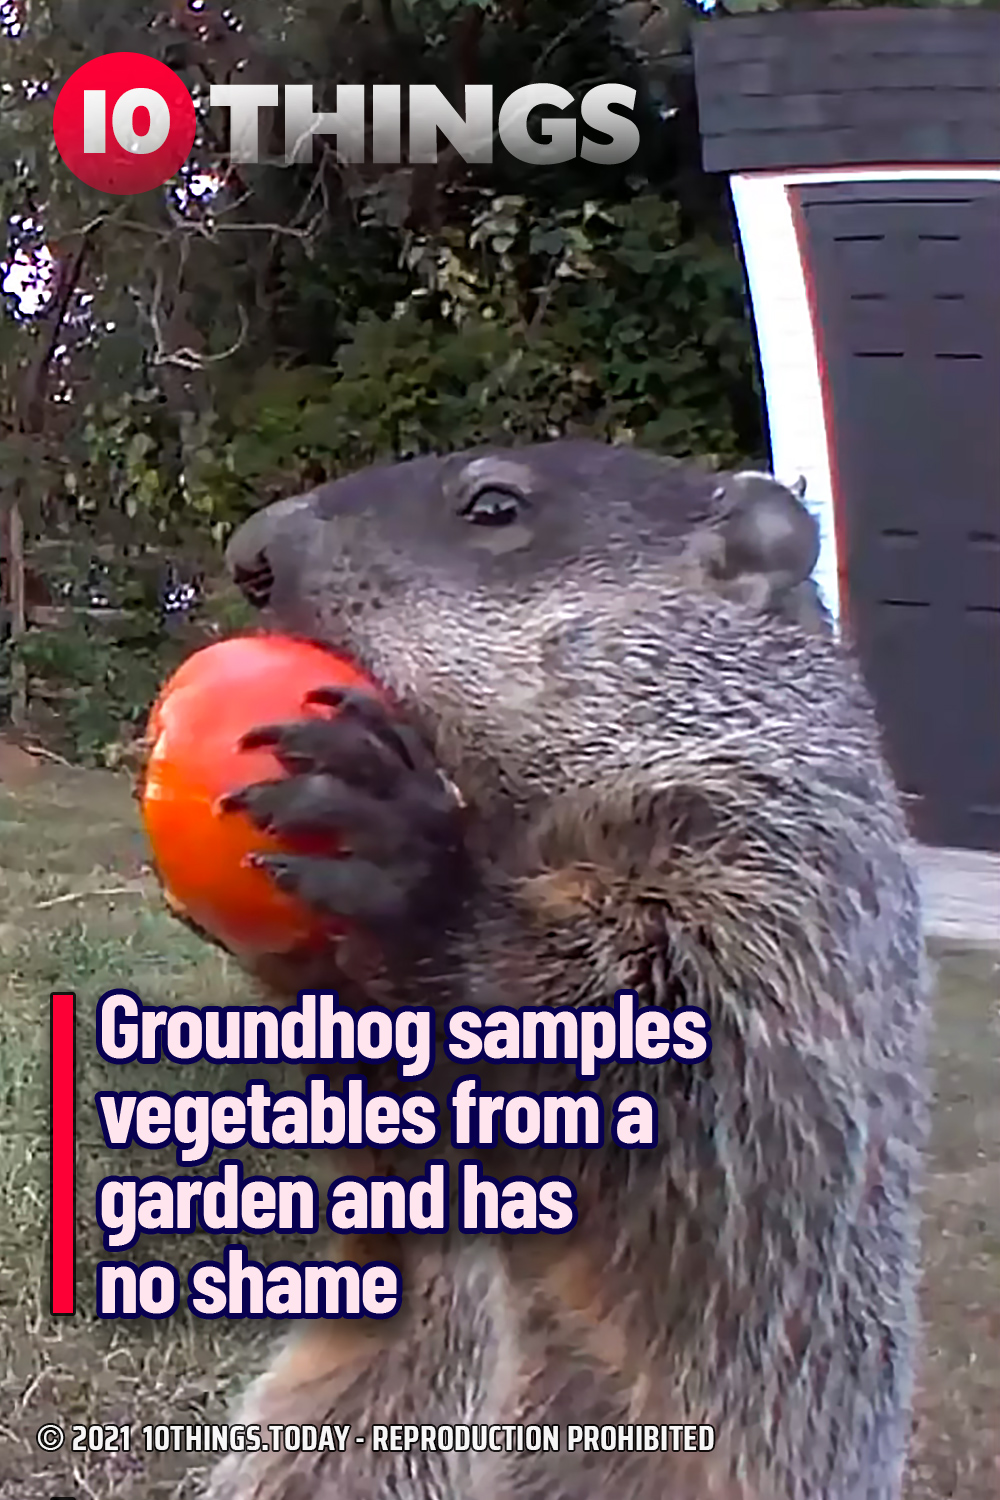 Groundhog samples vegetables from a garden and has no shame